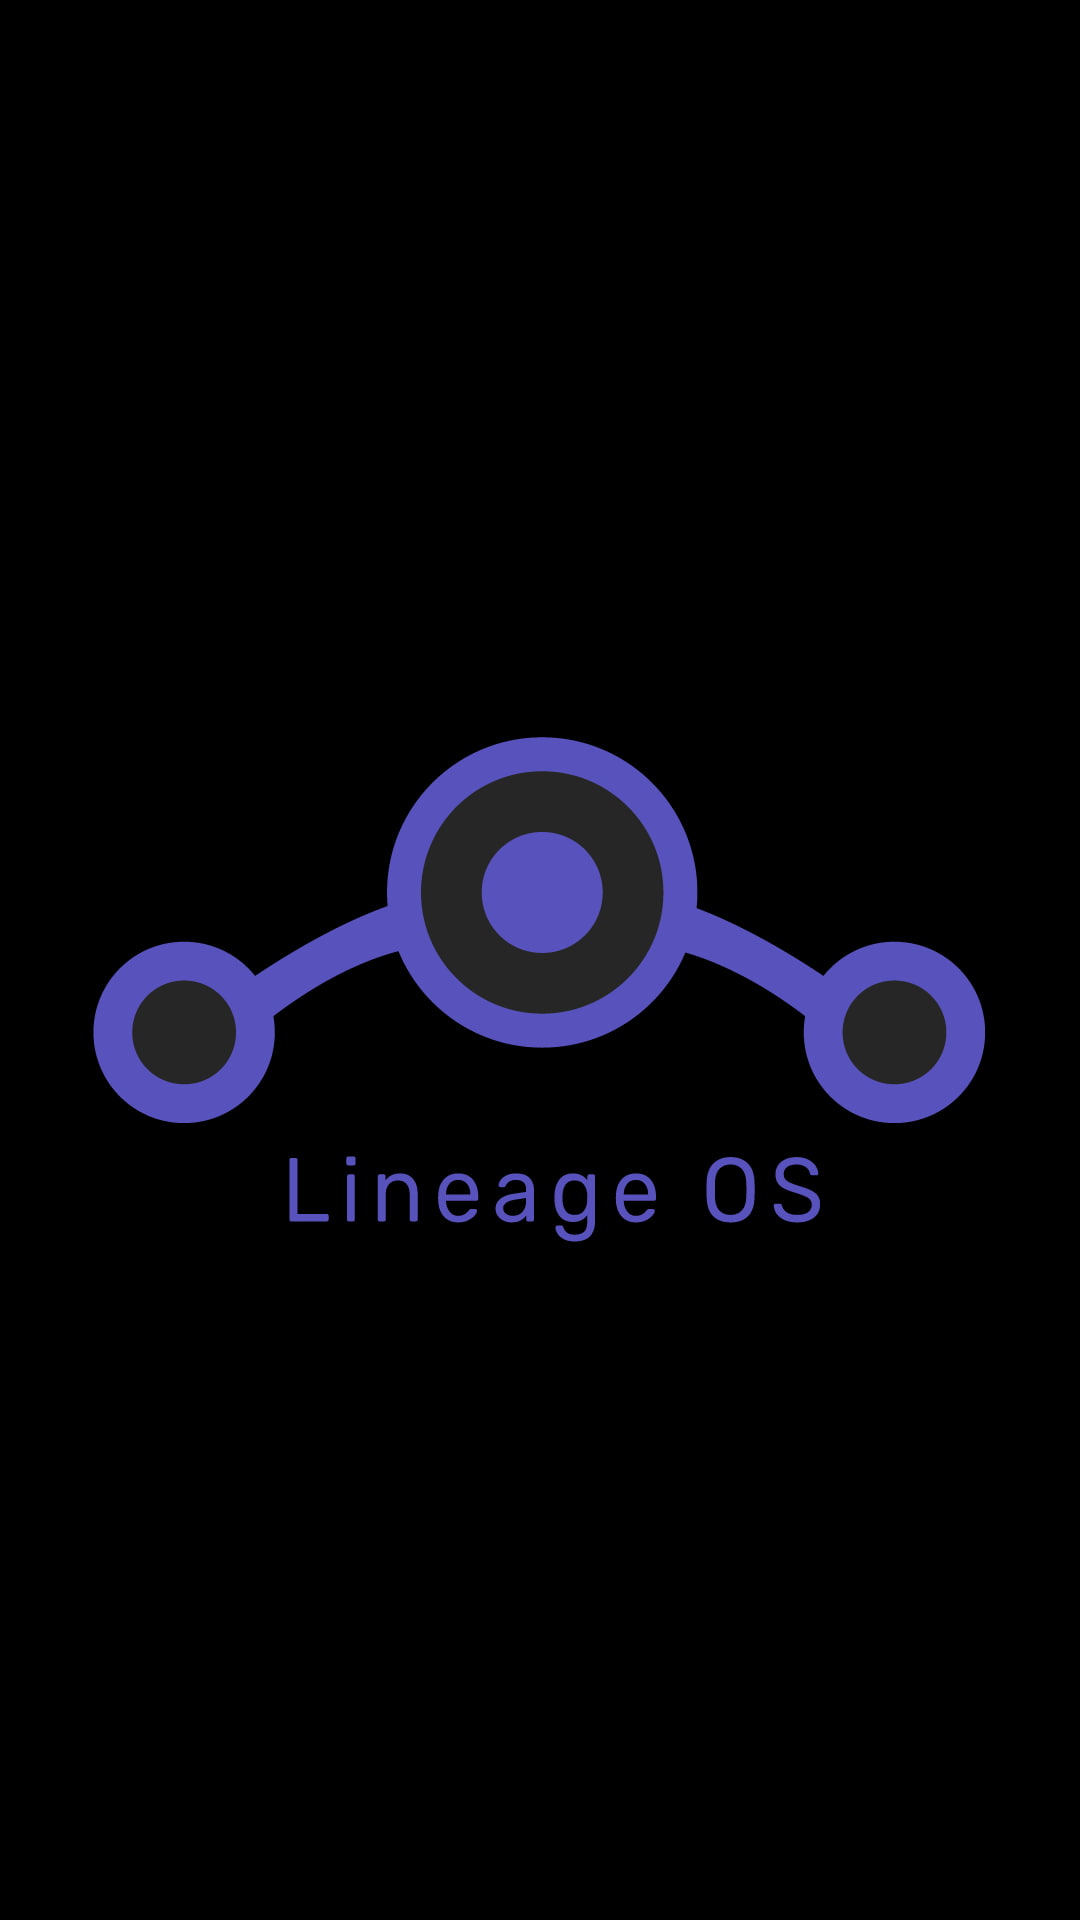 Lineage OS, Android (operating system), simple background, minimalism